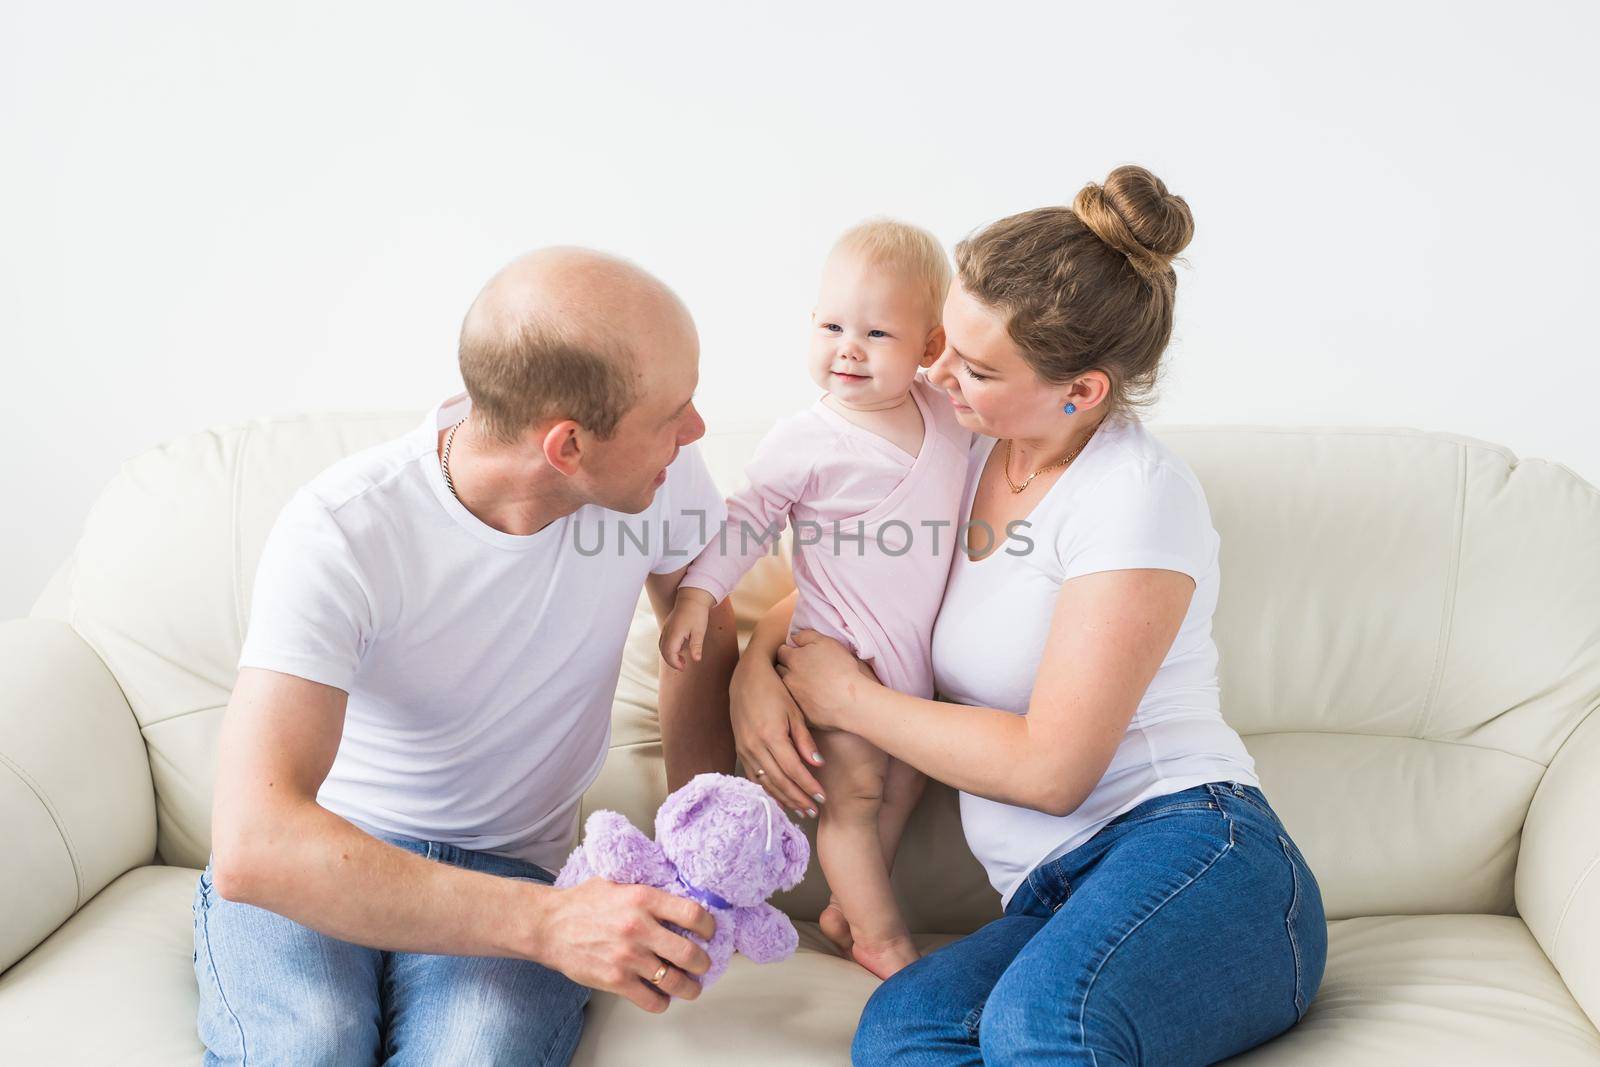 Family and children concept - Smiling mother and father holding their newborn baby daughter at home by Satura86